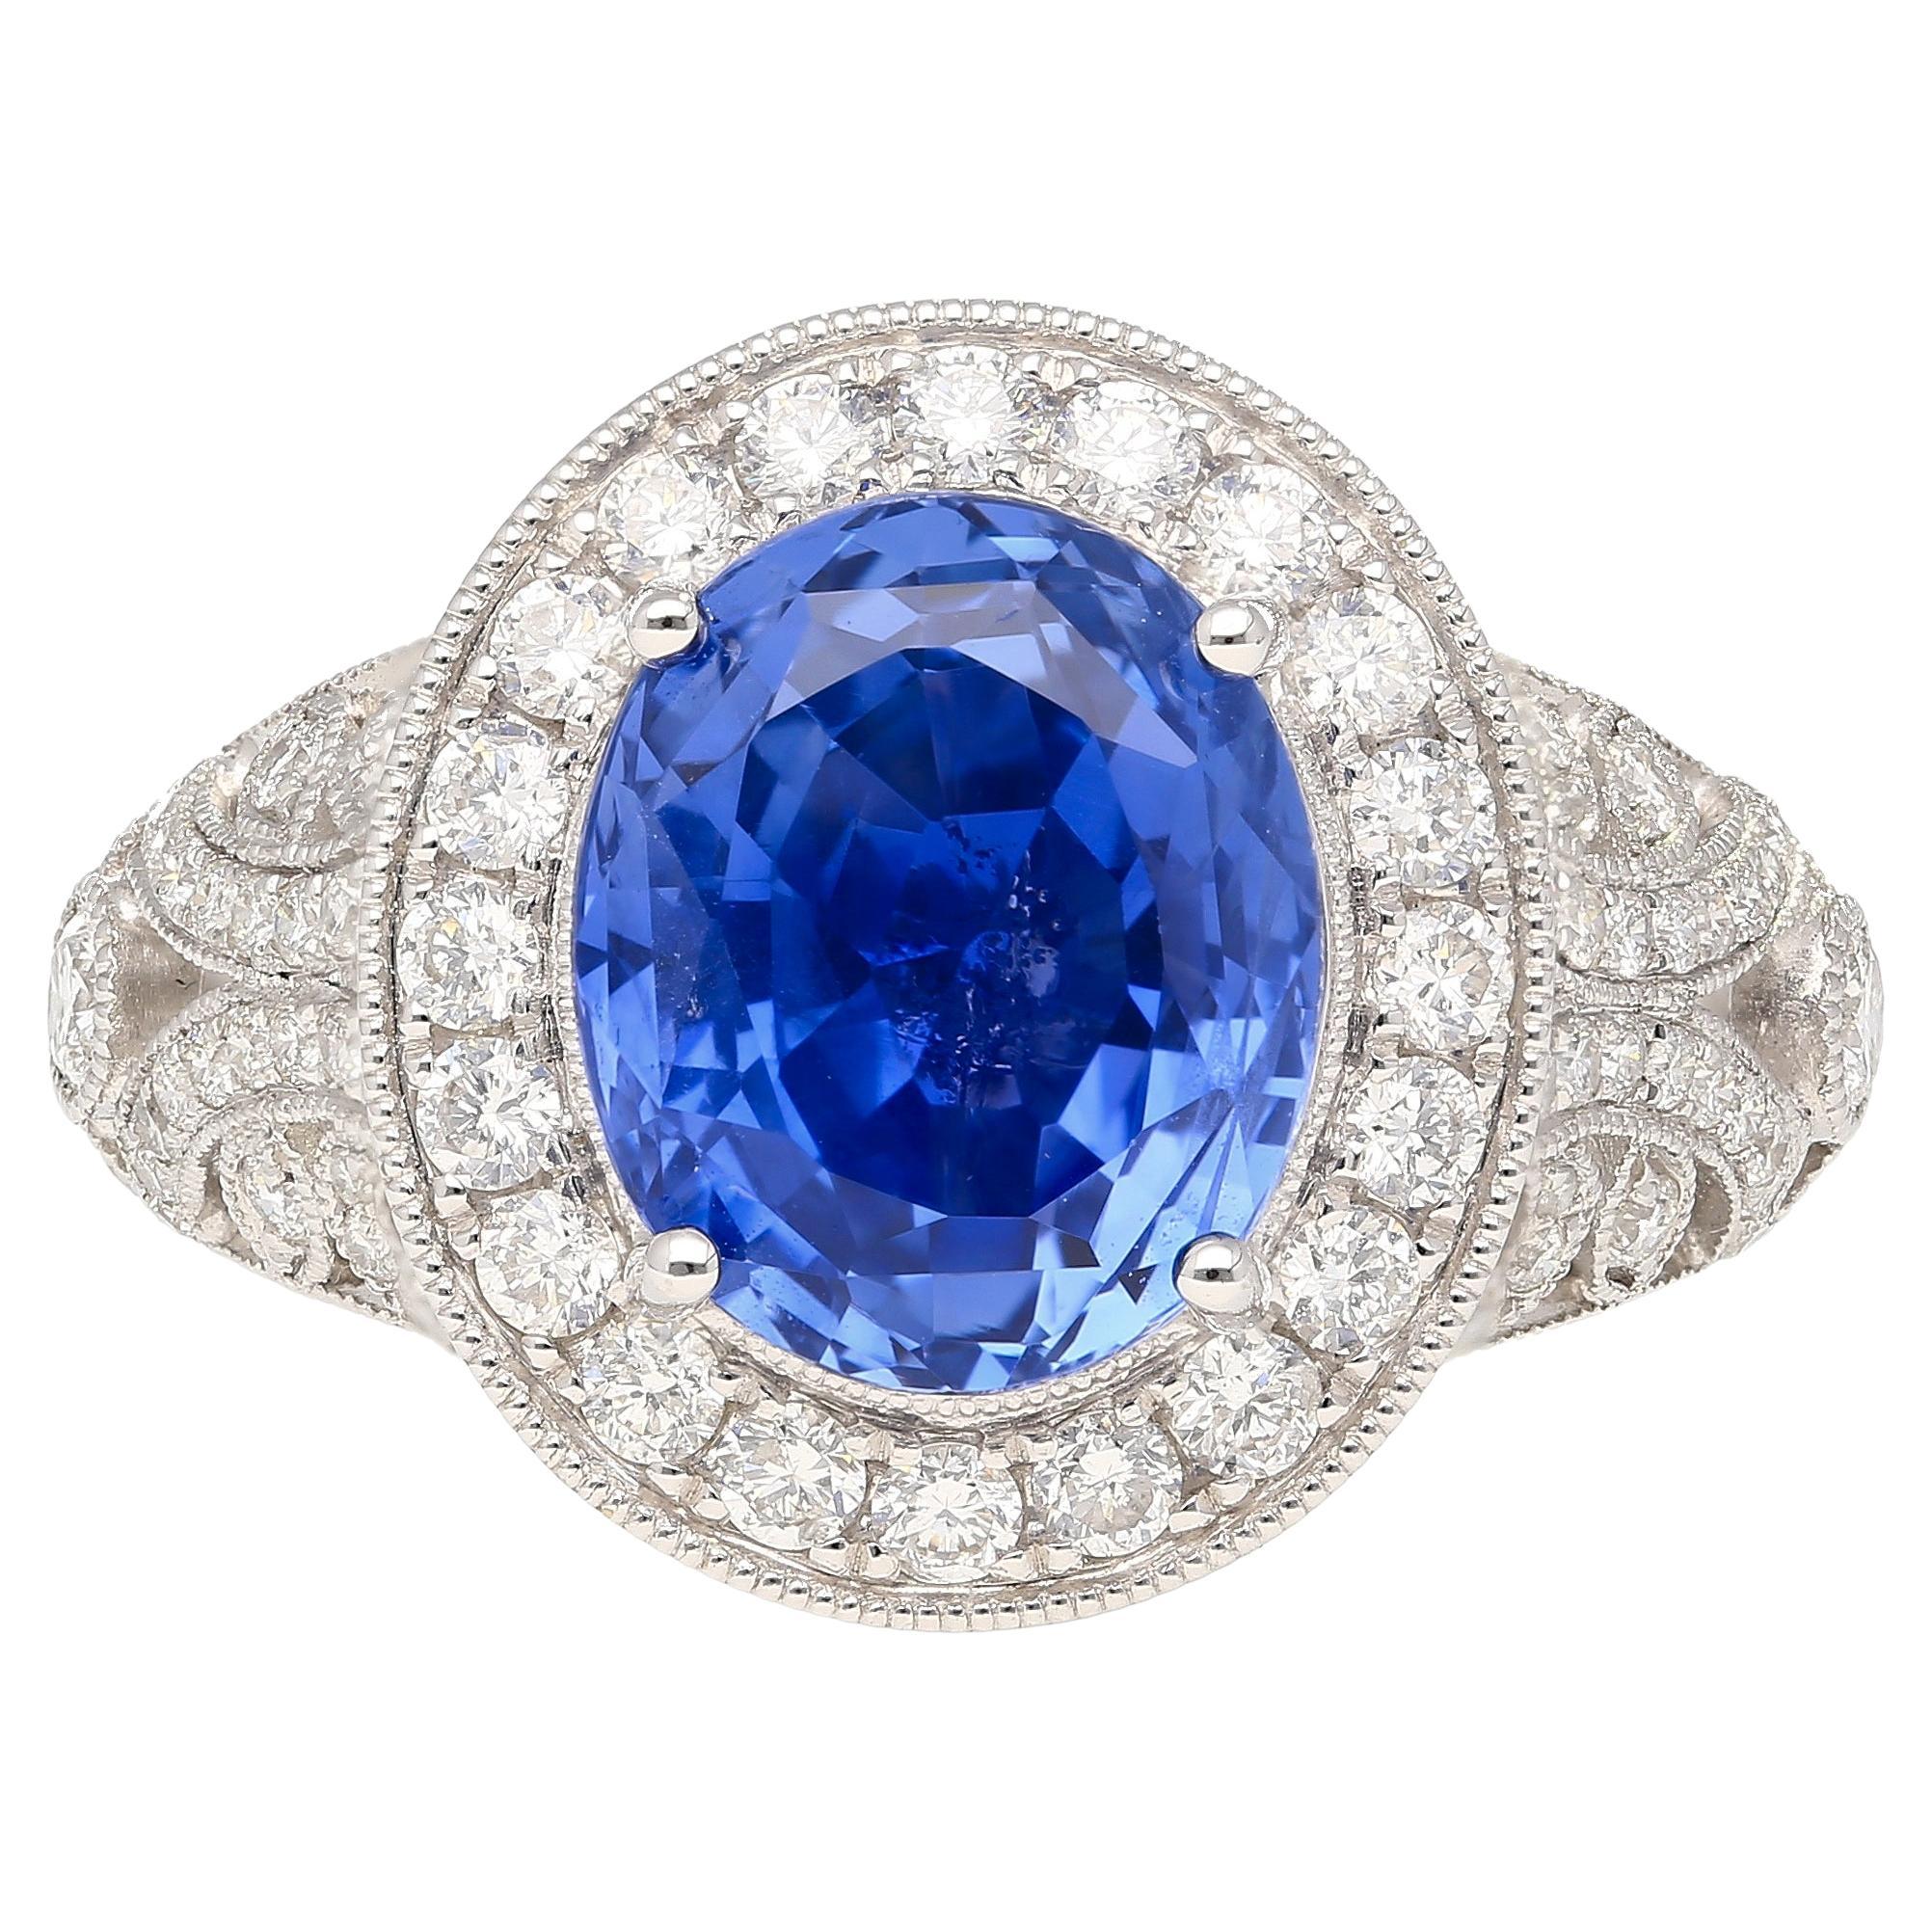 No Heat 4.84 Carat Violet-Blue Ceylon Sapphire with Diamonds in 18K Gold Ring For Sale